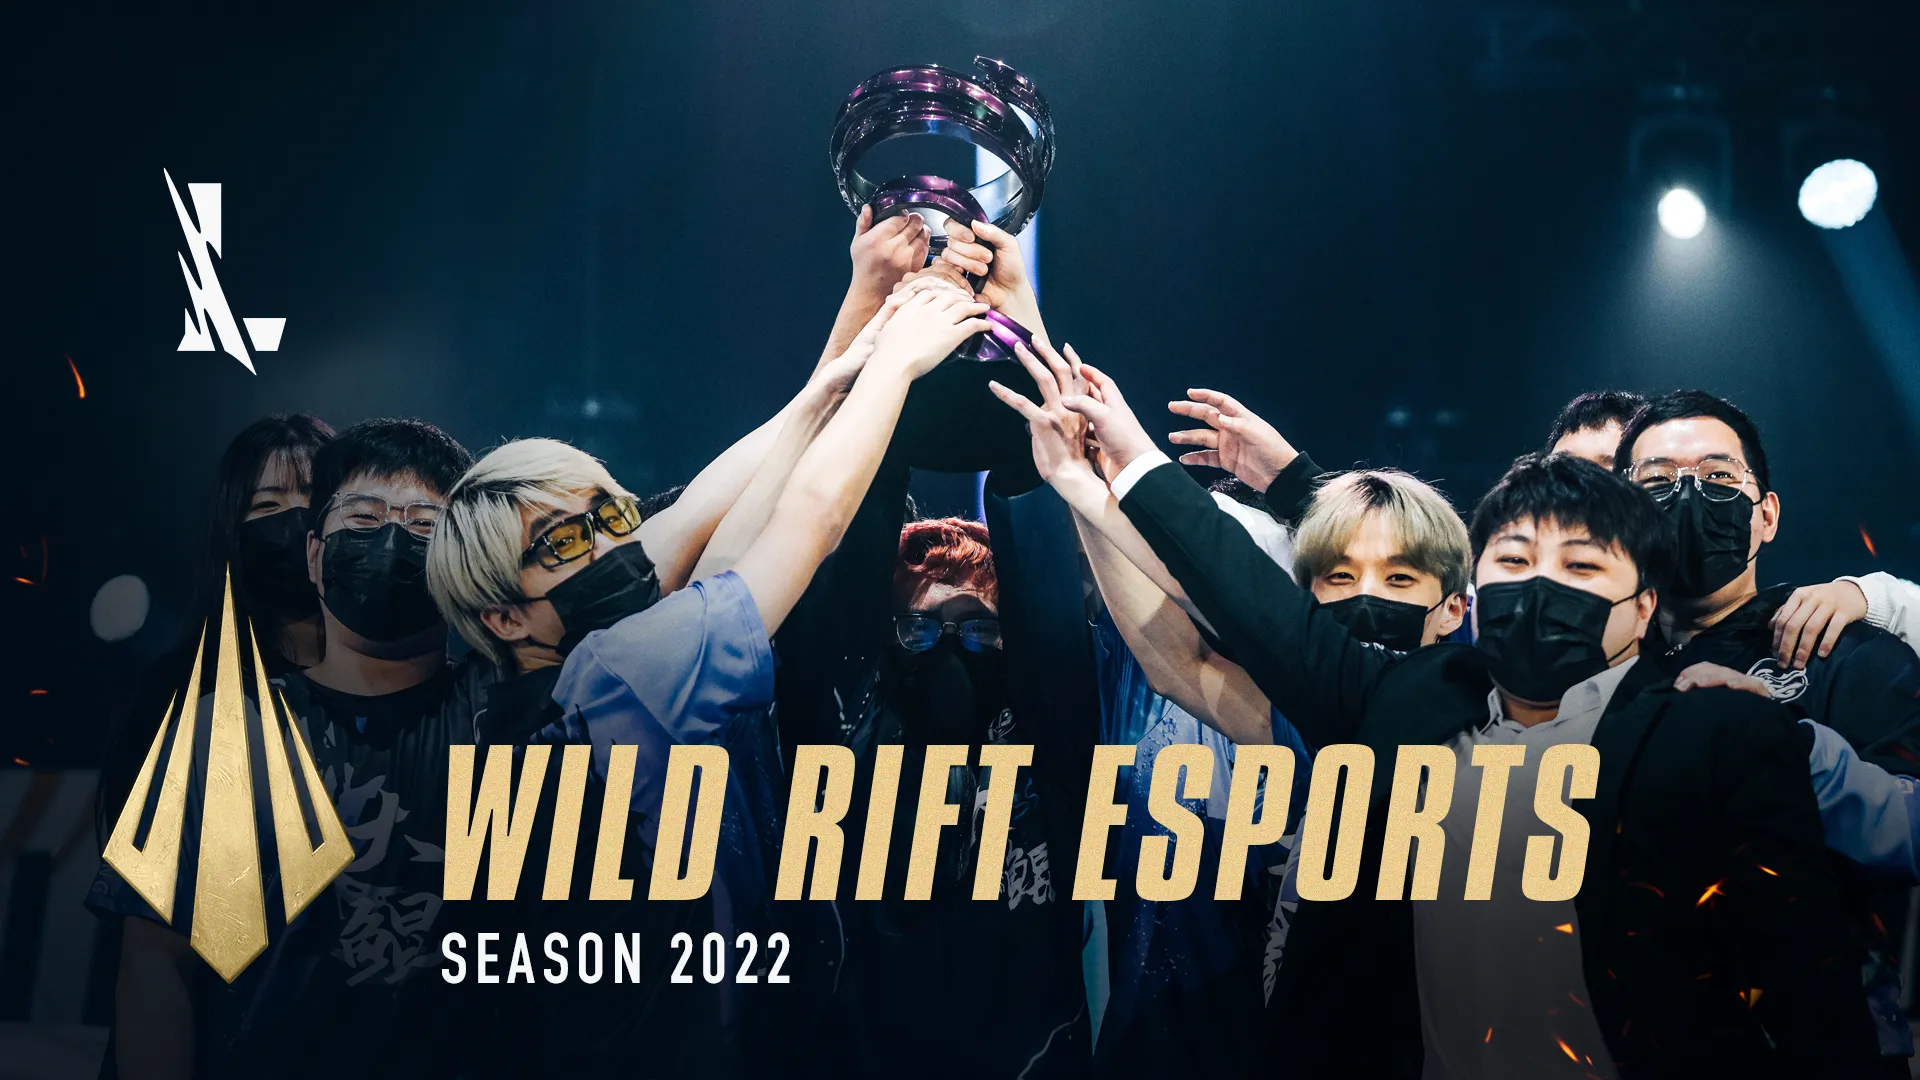 Who will be the next League champion? Full roadmap on upcoming League  champion releases and reworks - Dot Esports